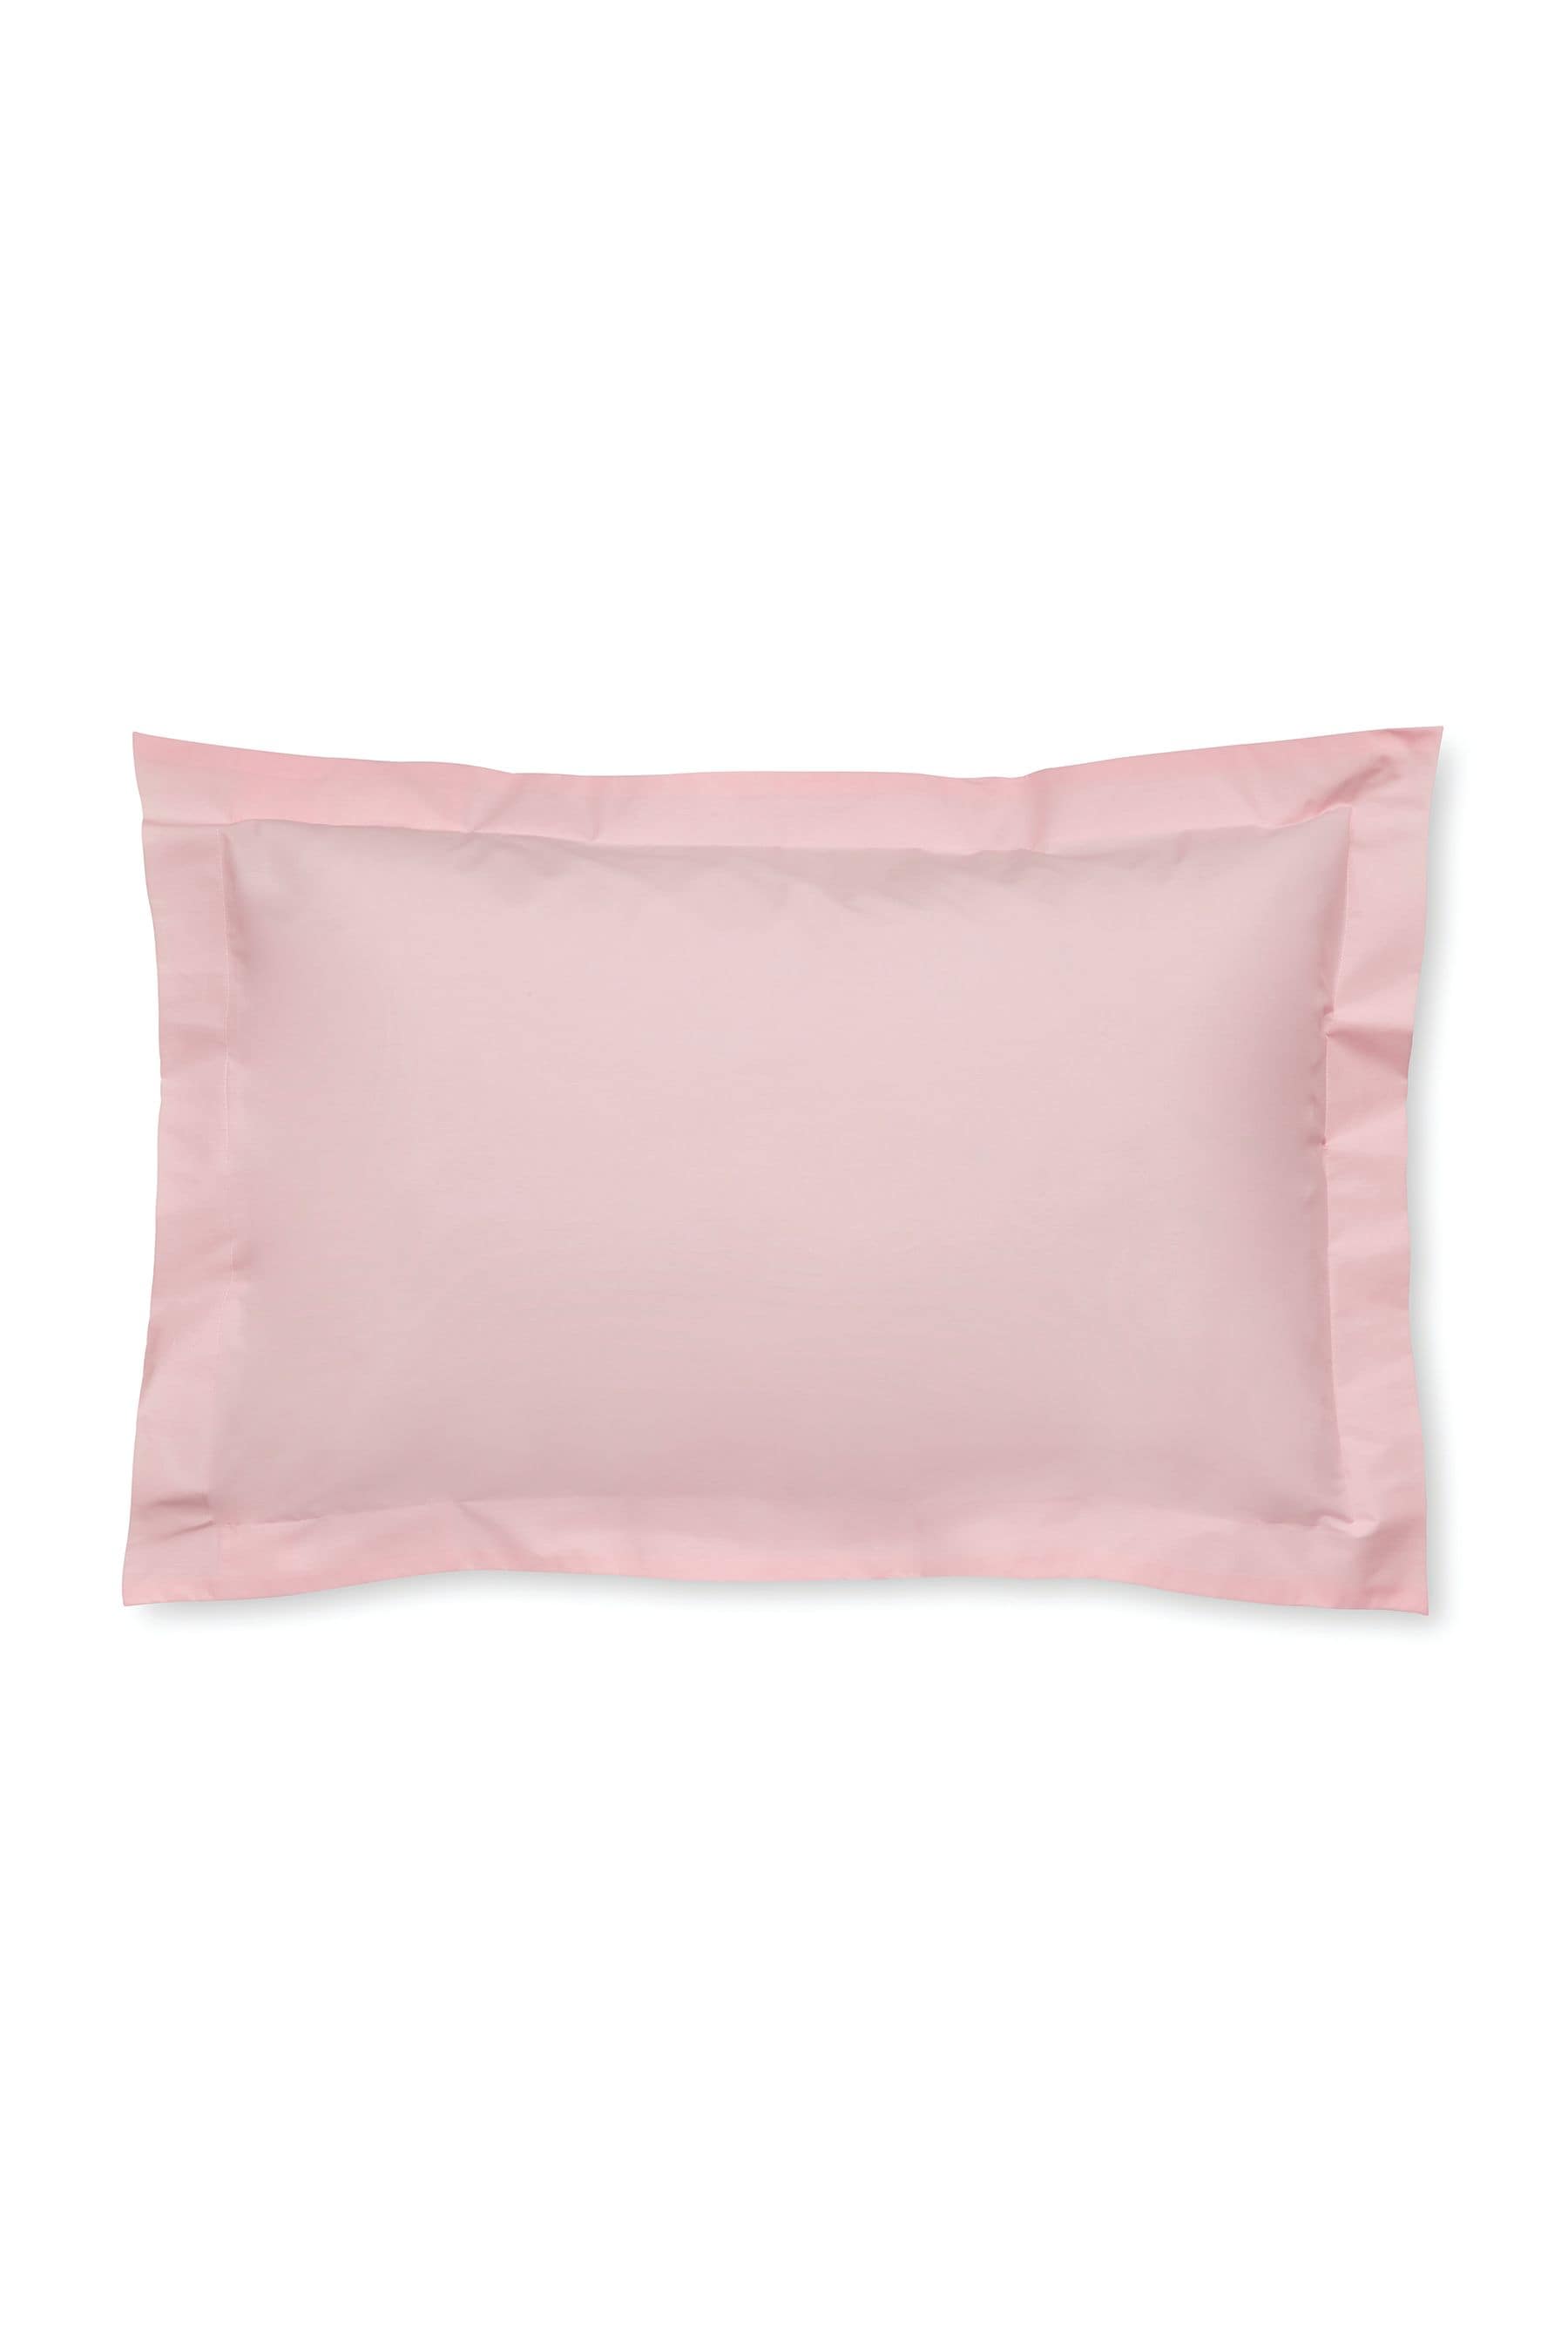 Buy Laura Ashley Set of 2 Blush Pink 400 Thread Count Cotton ...